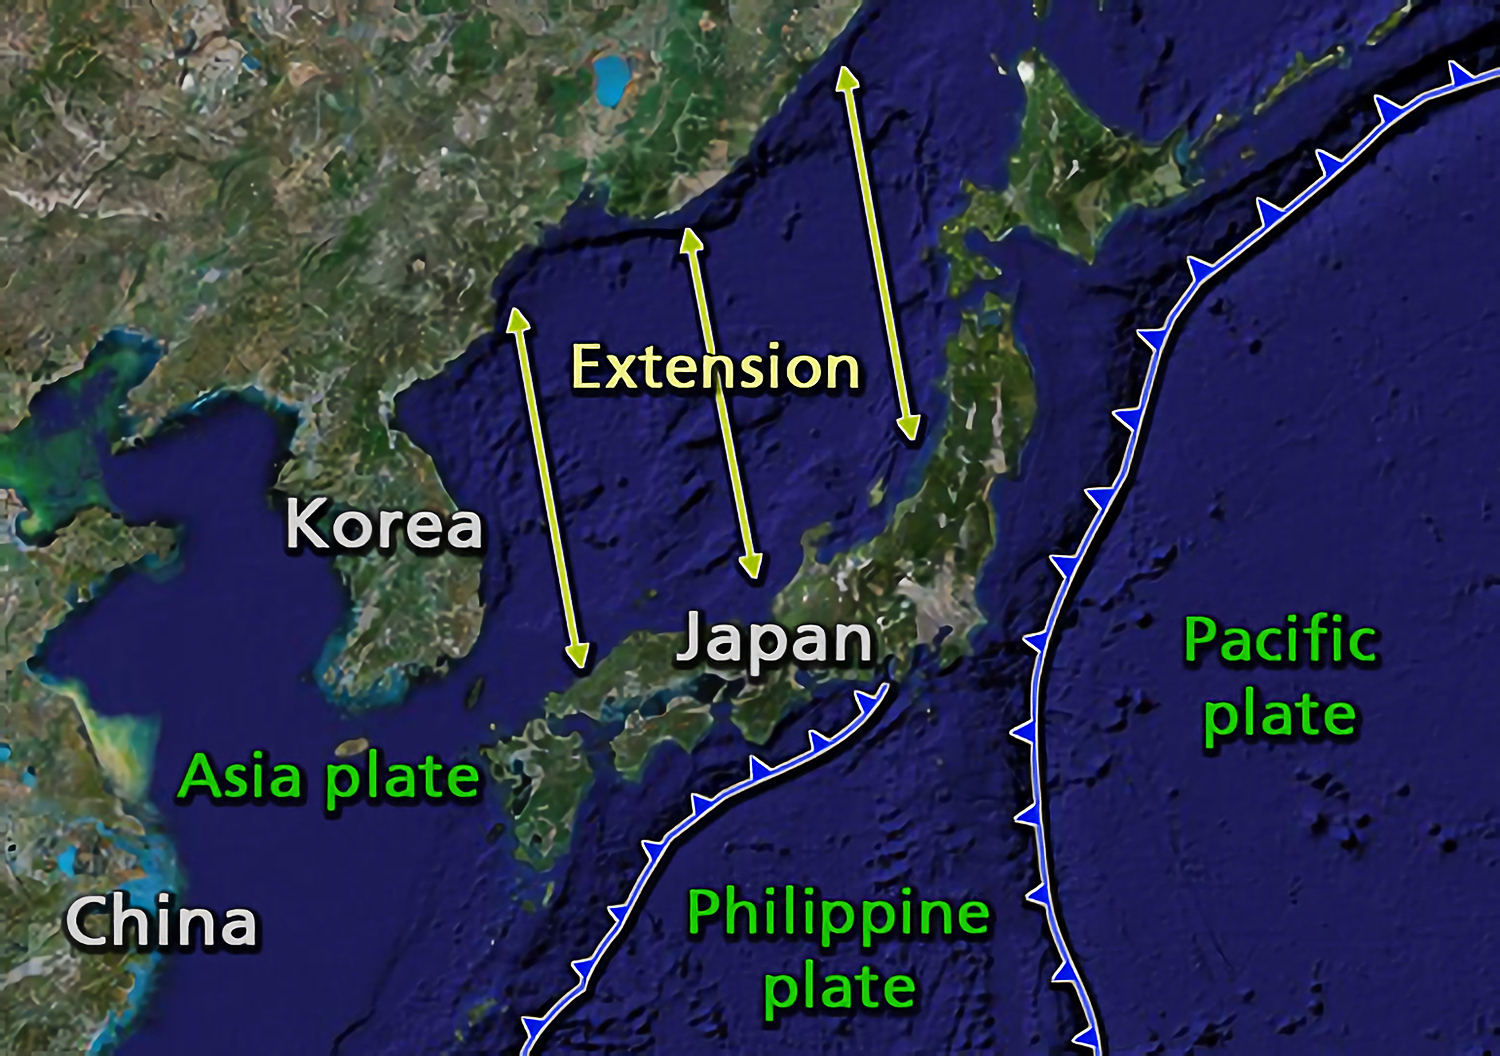 The islands of Japan were separated from mainland Asia by back-arc spreading.